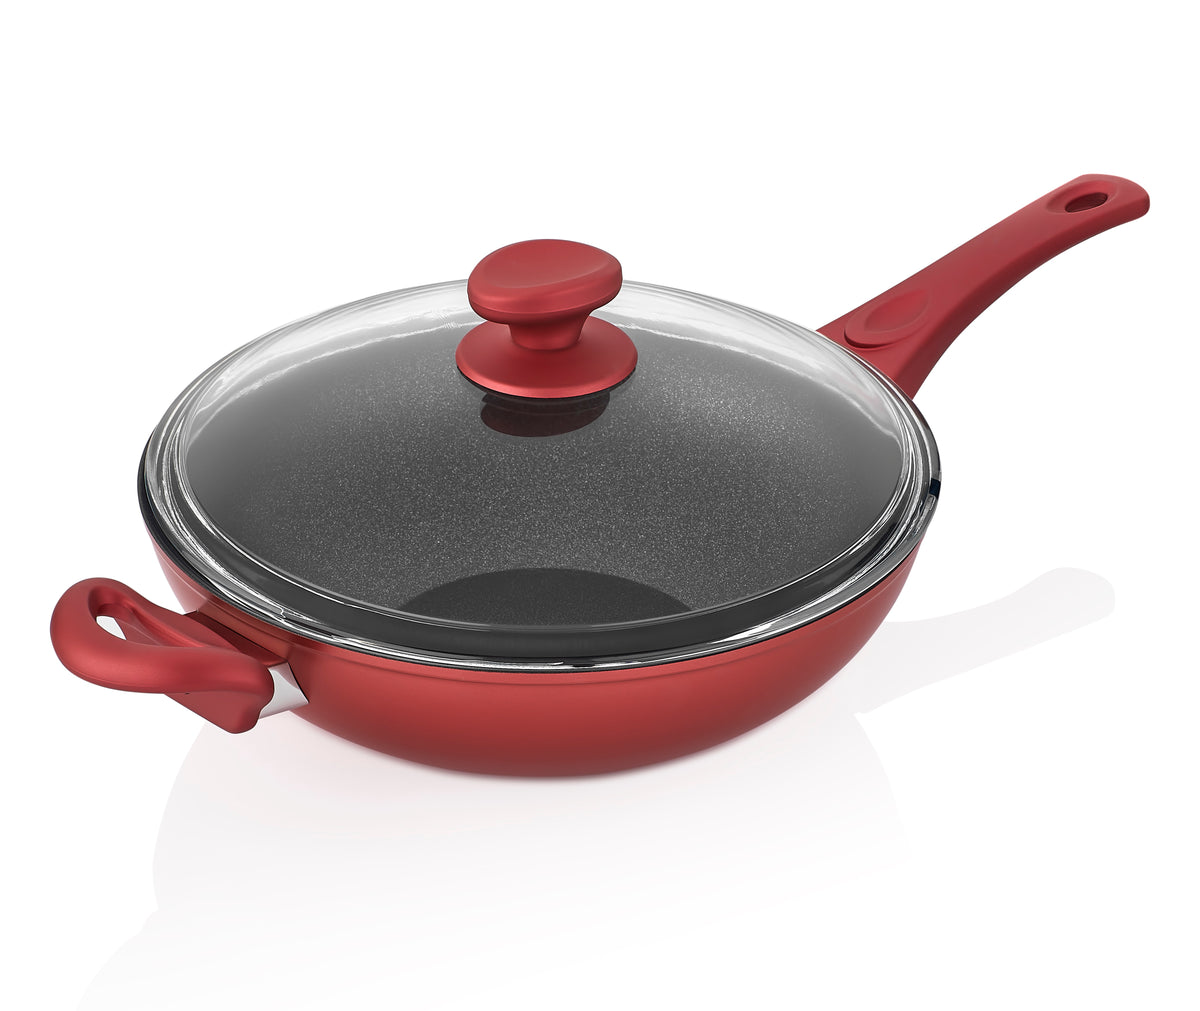 Intignis Wok With Lid - Non-stick Stainless Steel Base - Red